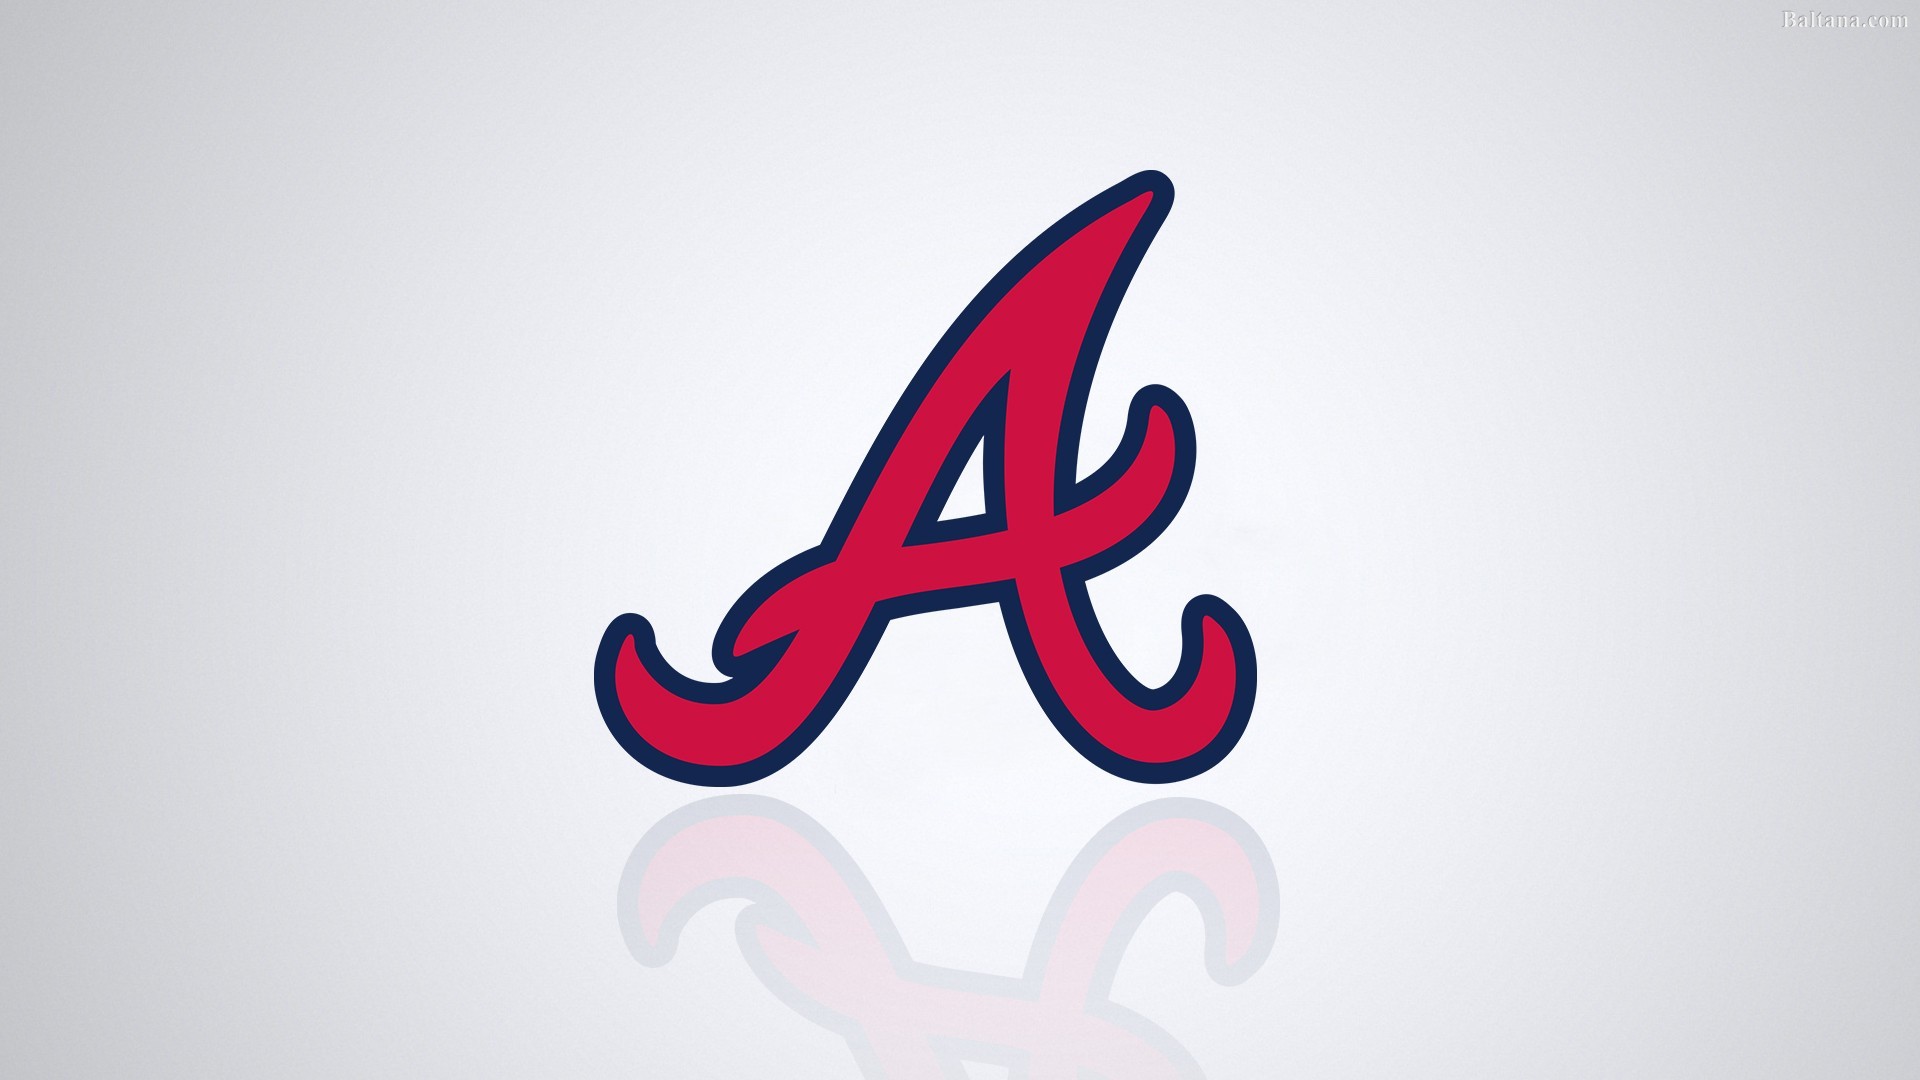 HD Desktop Wallpaper Atlanta Braves With high-resolution 1920X1080 pixel. You can use this wallpaper for Mac Desktop Wallpaper, Laptop Screensavers, Android Wallpapers, Tablet or iPhone Home Screen and another mobile phone device